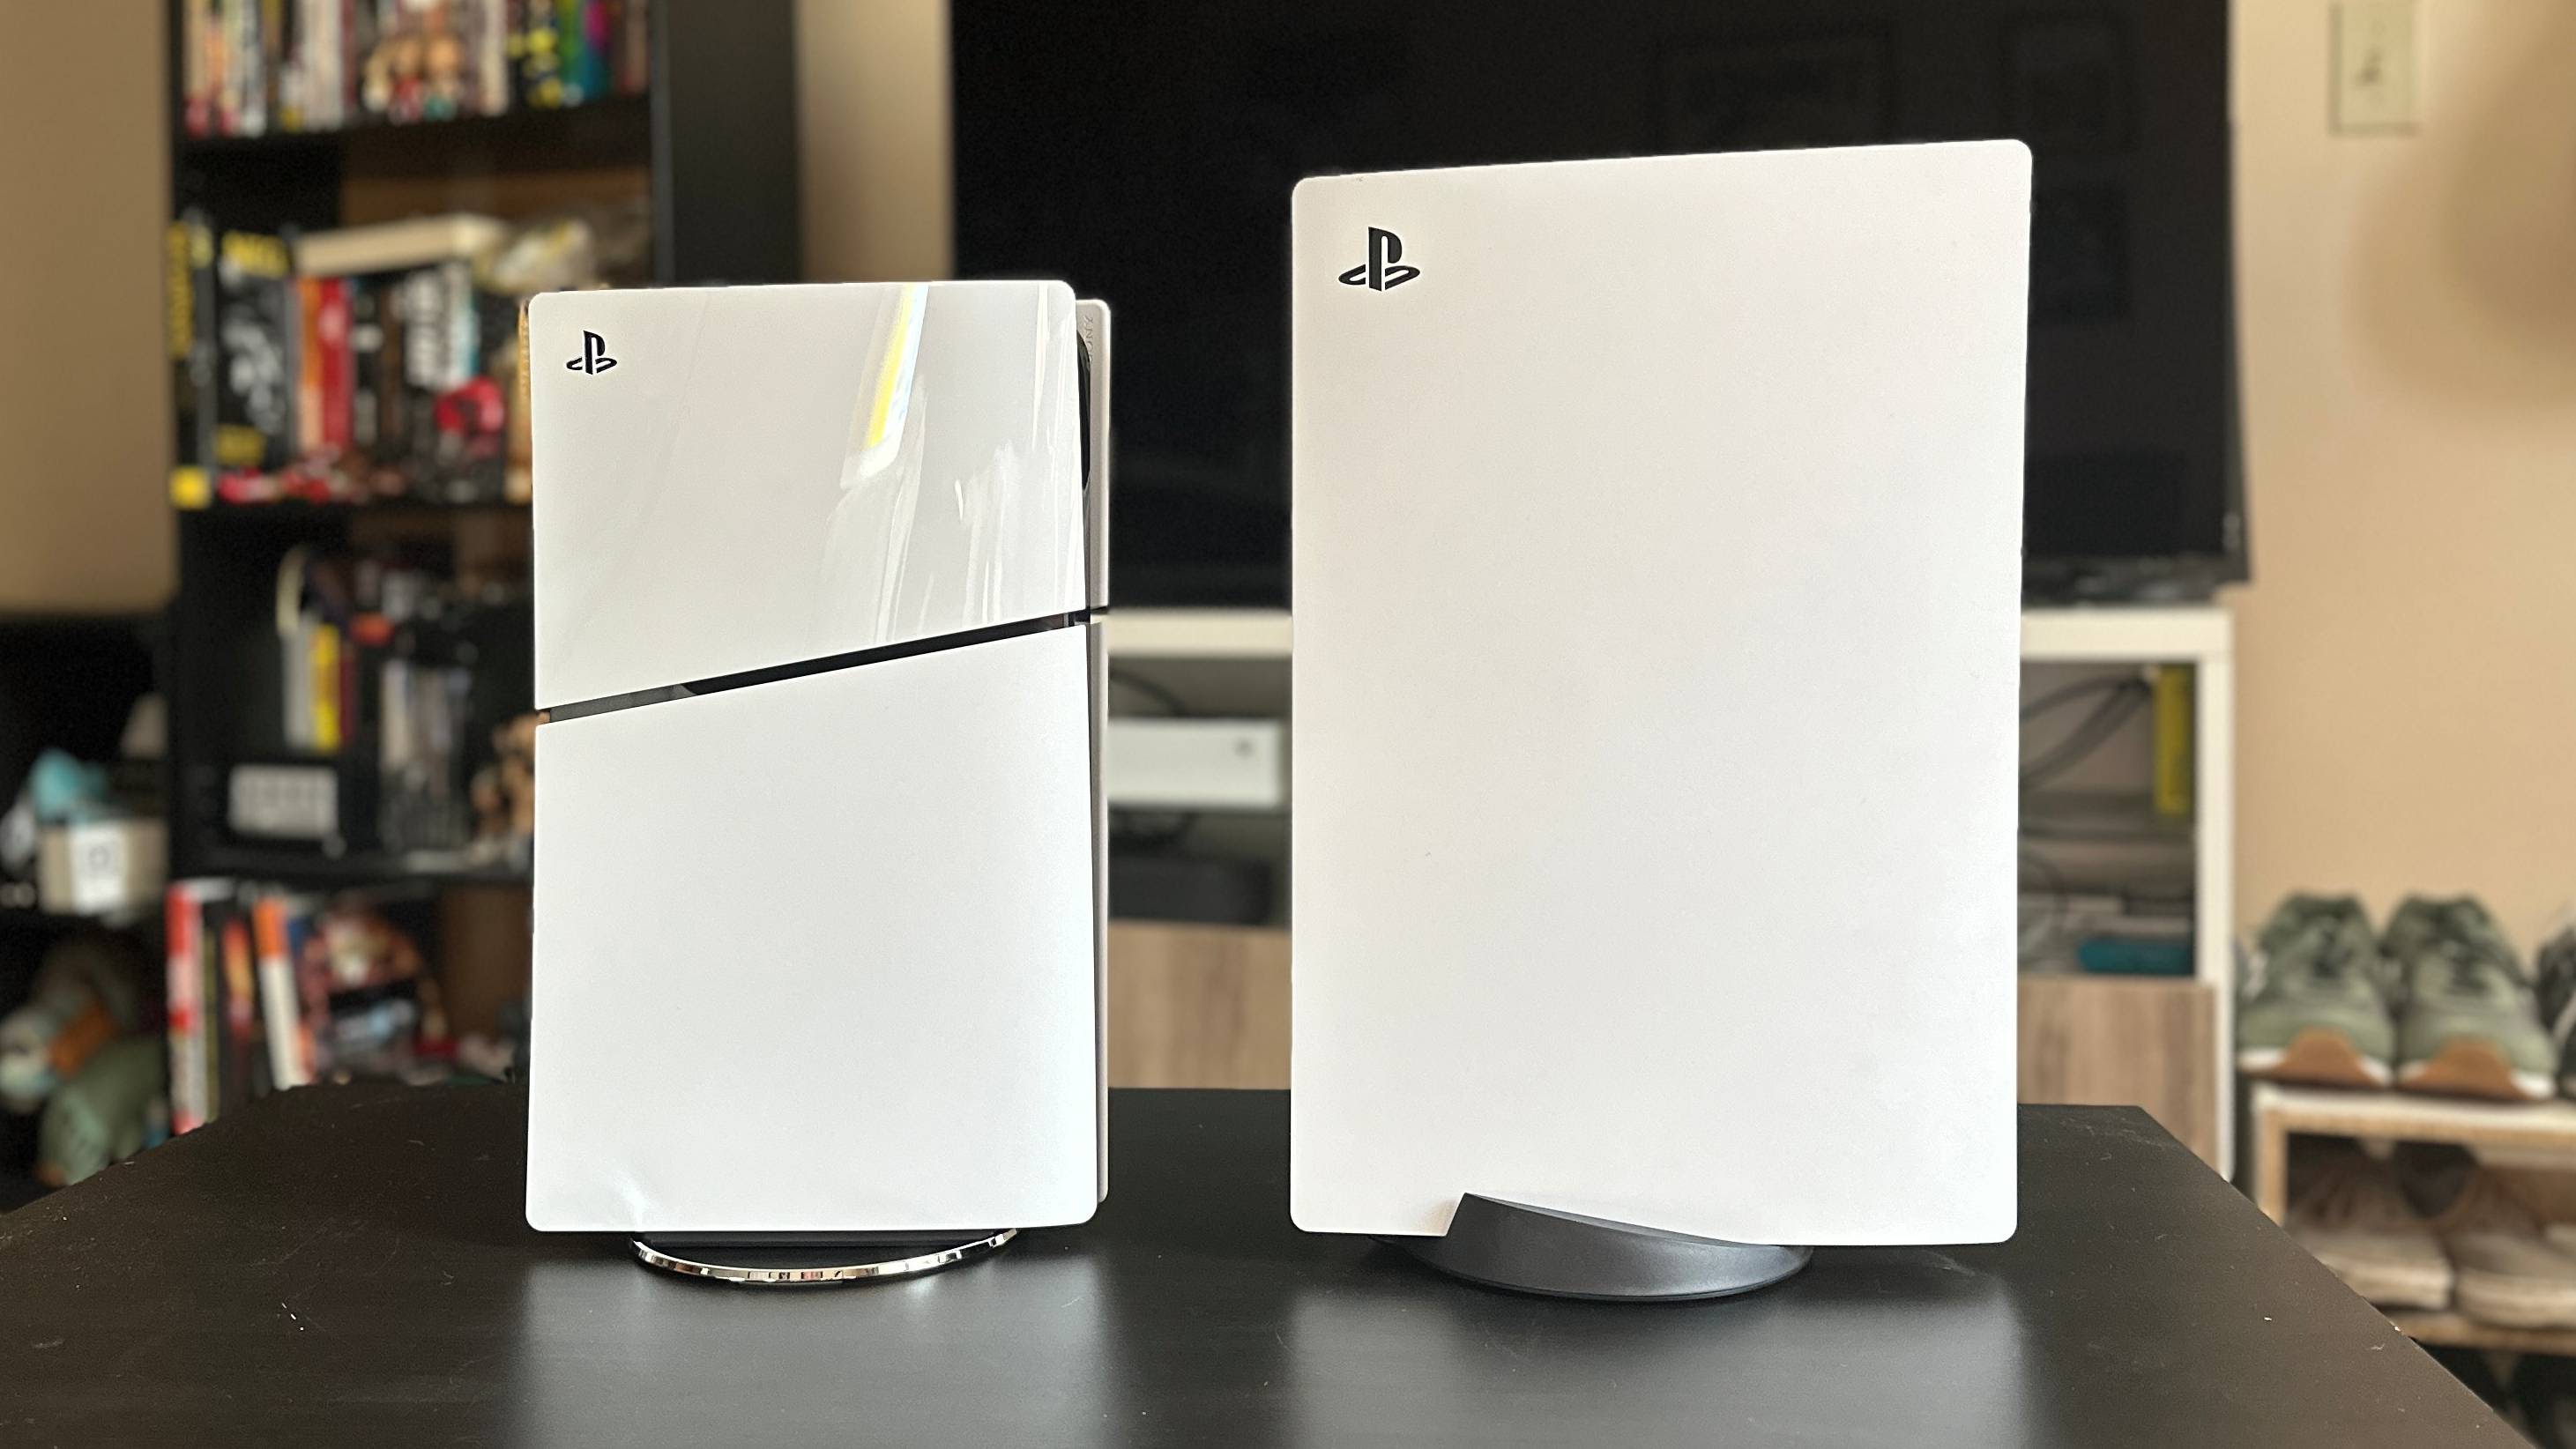 PS5 Slim hands-on: What's new and different?